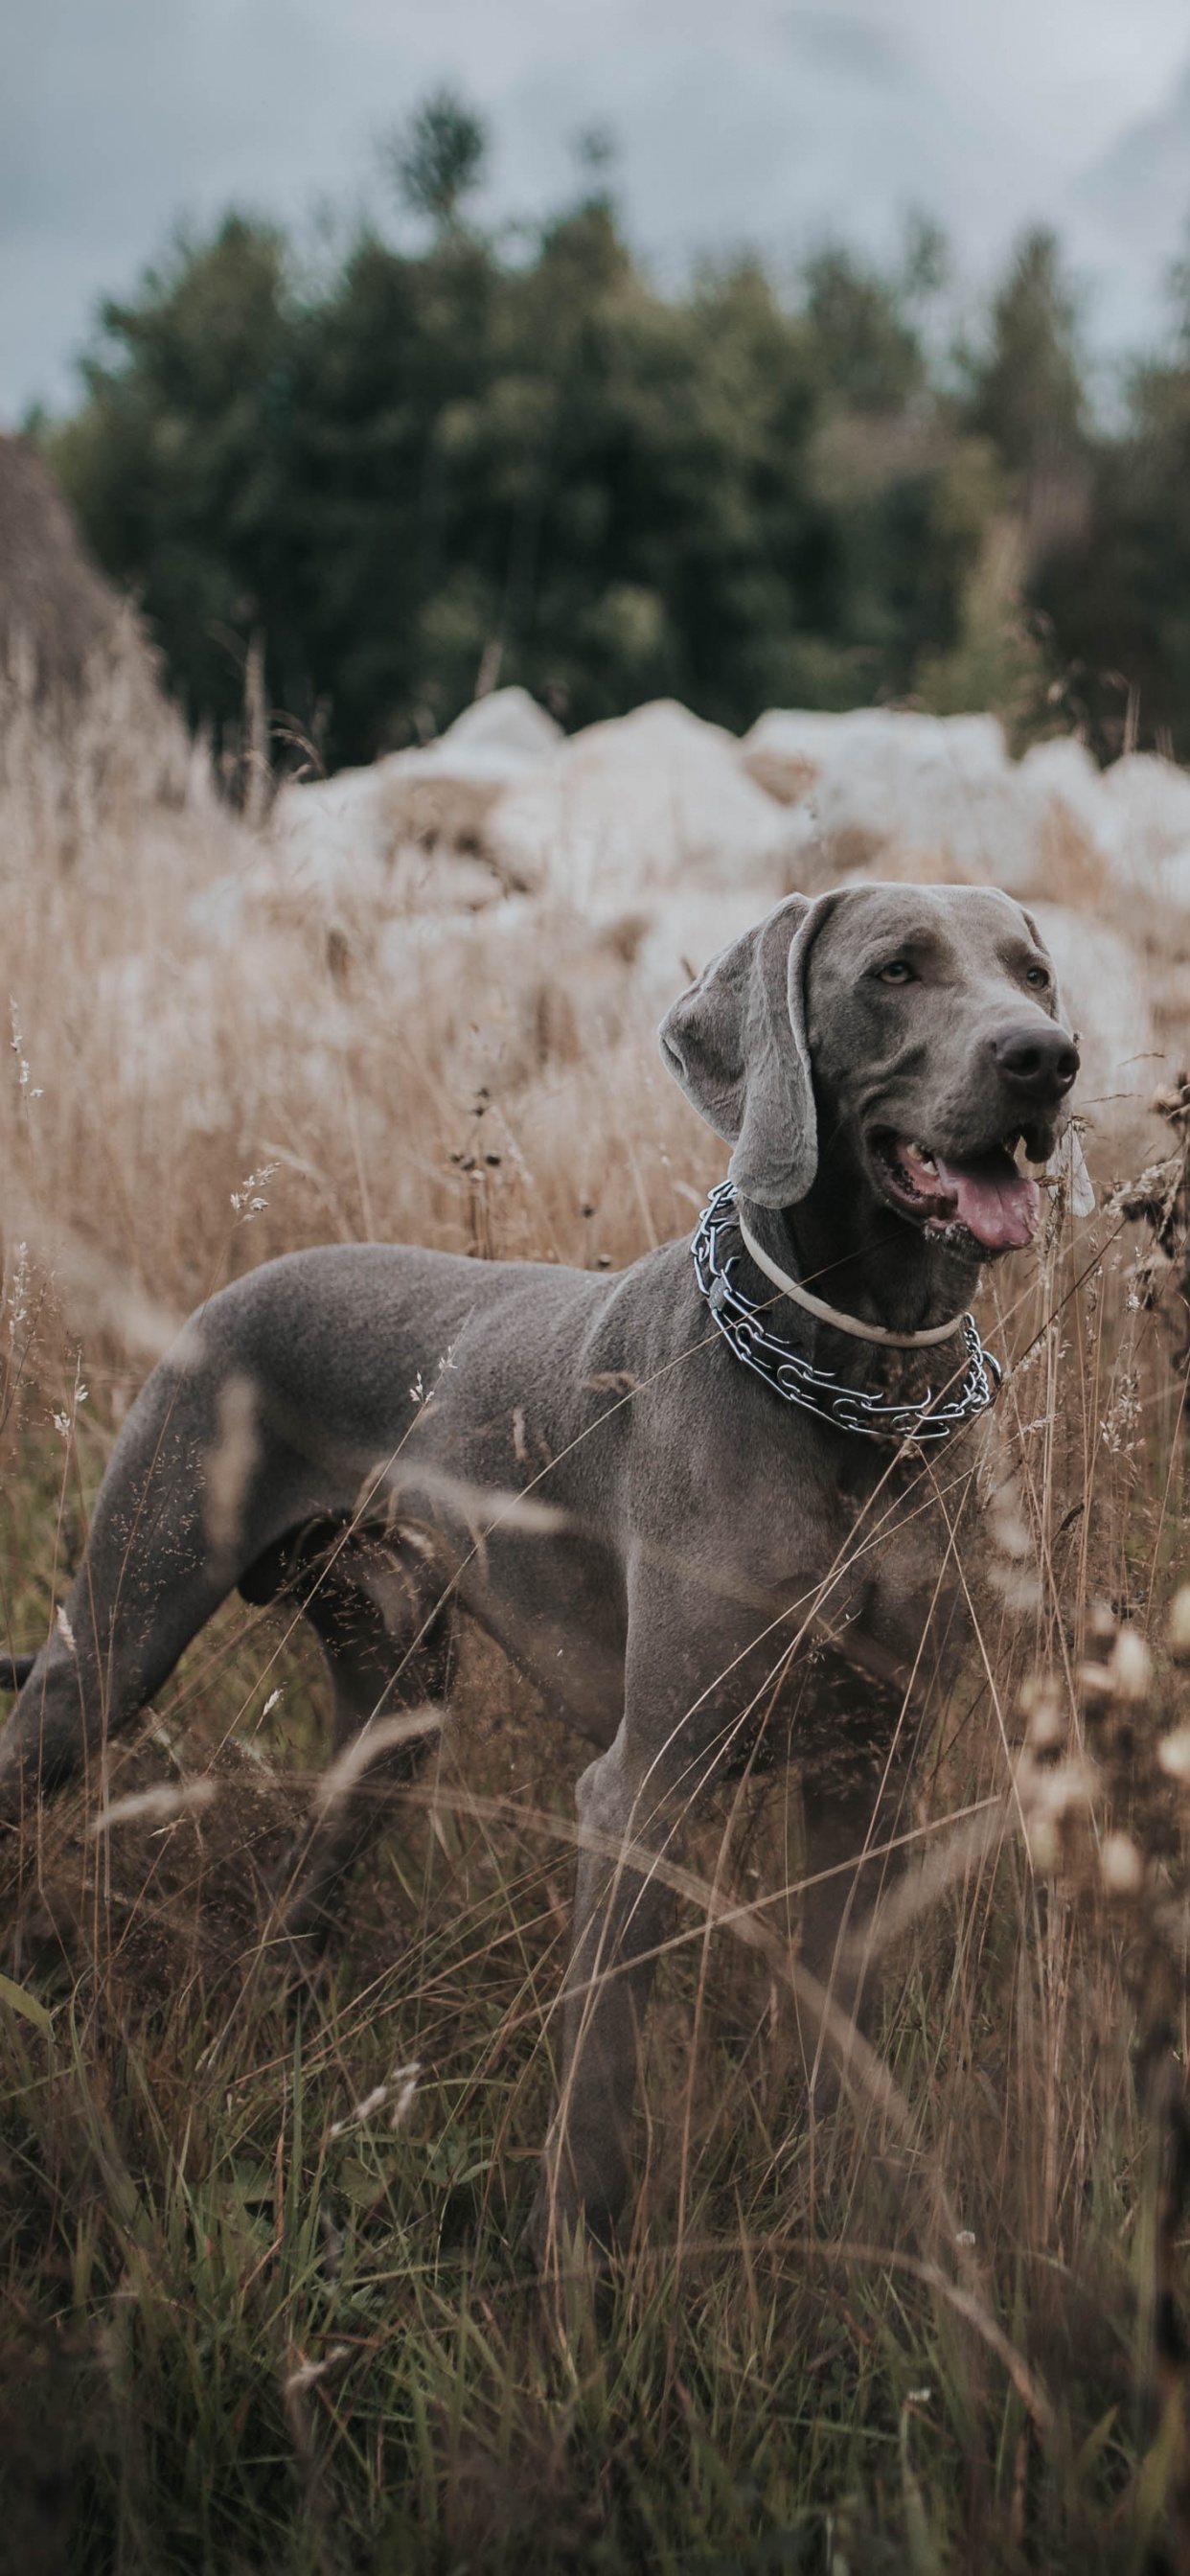 Gray Short Coated Dog on Brown Grass Field During Daytime. Wallpaper in 1242x2688 Resolution